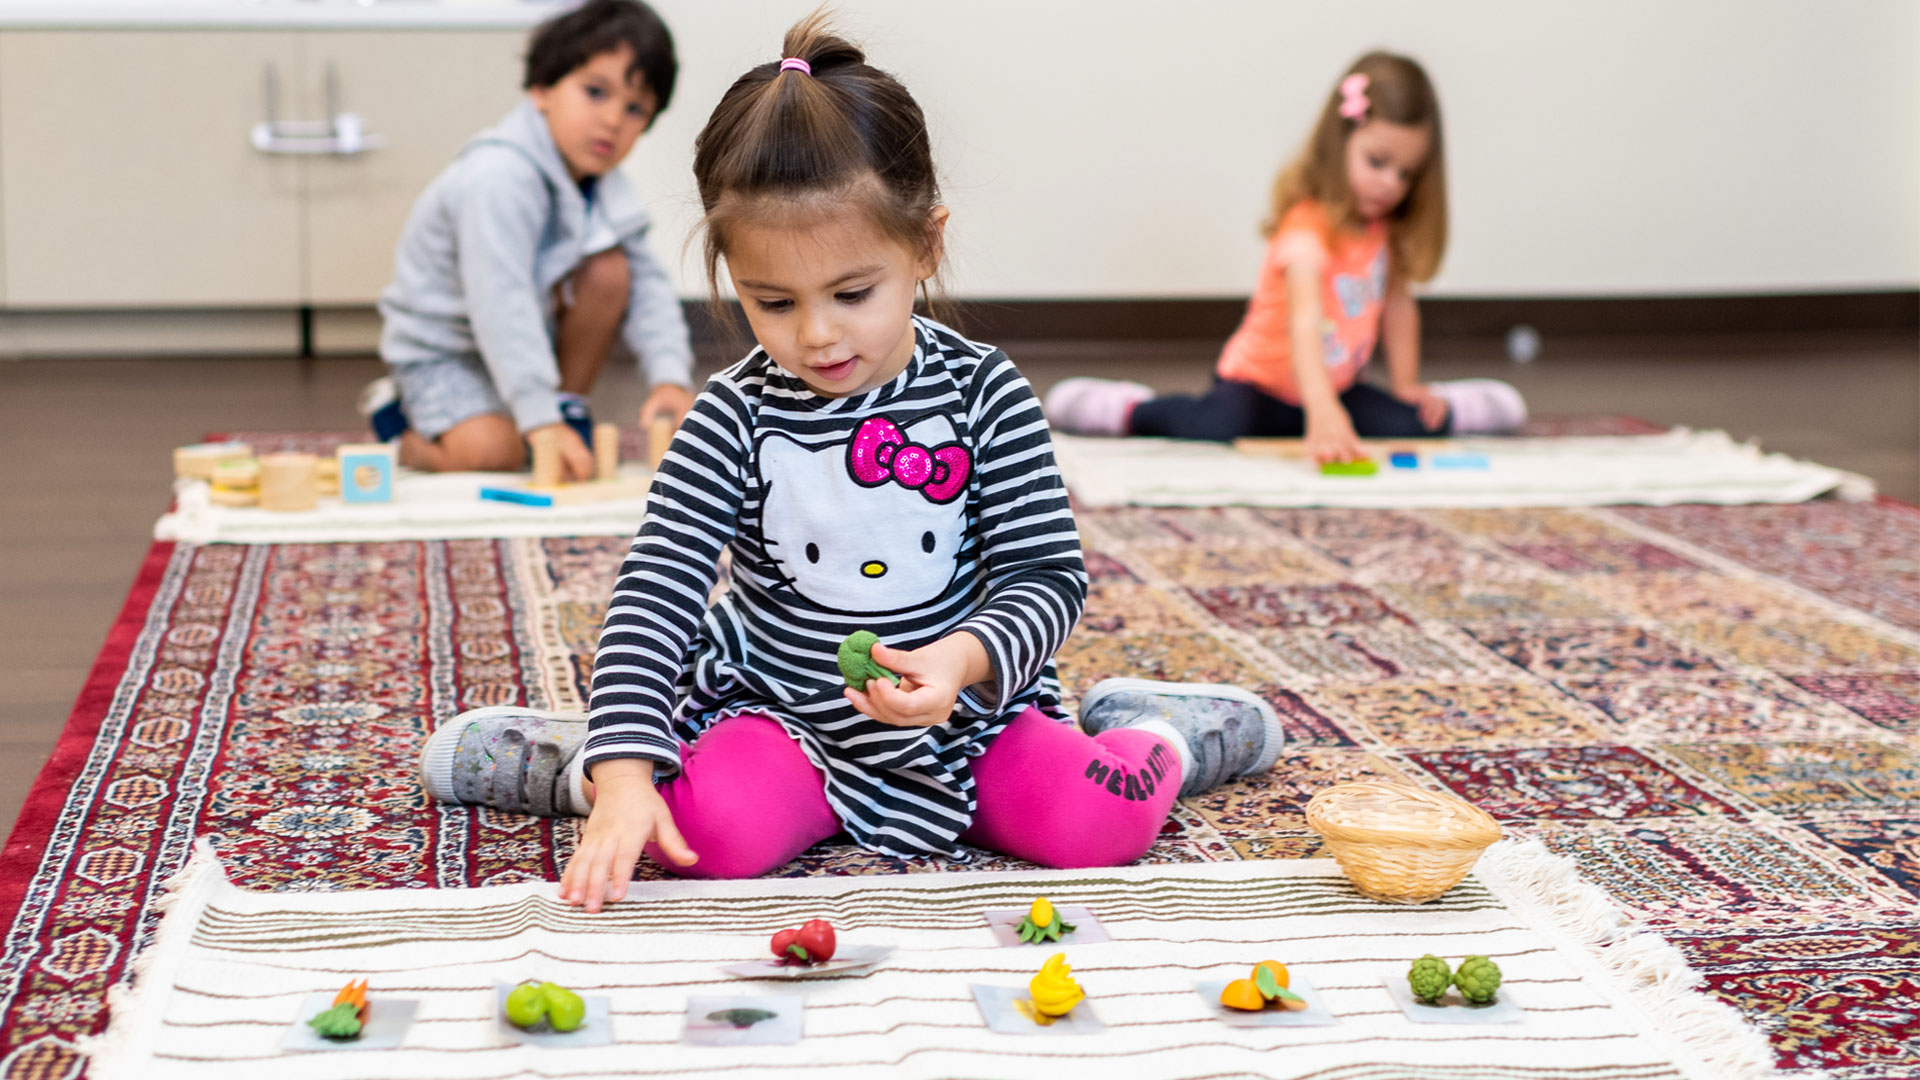 A little girl wearing a striped dress placing toy fruits on her white rug